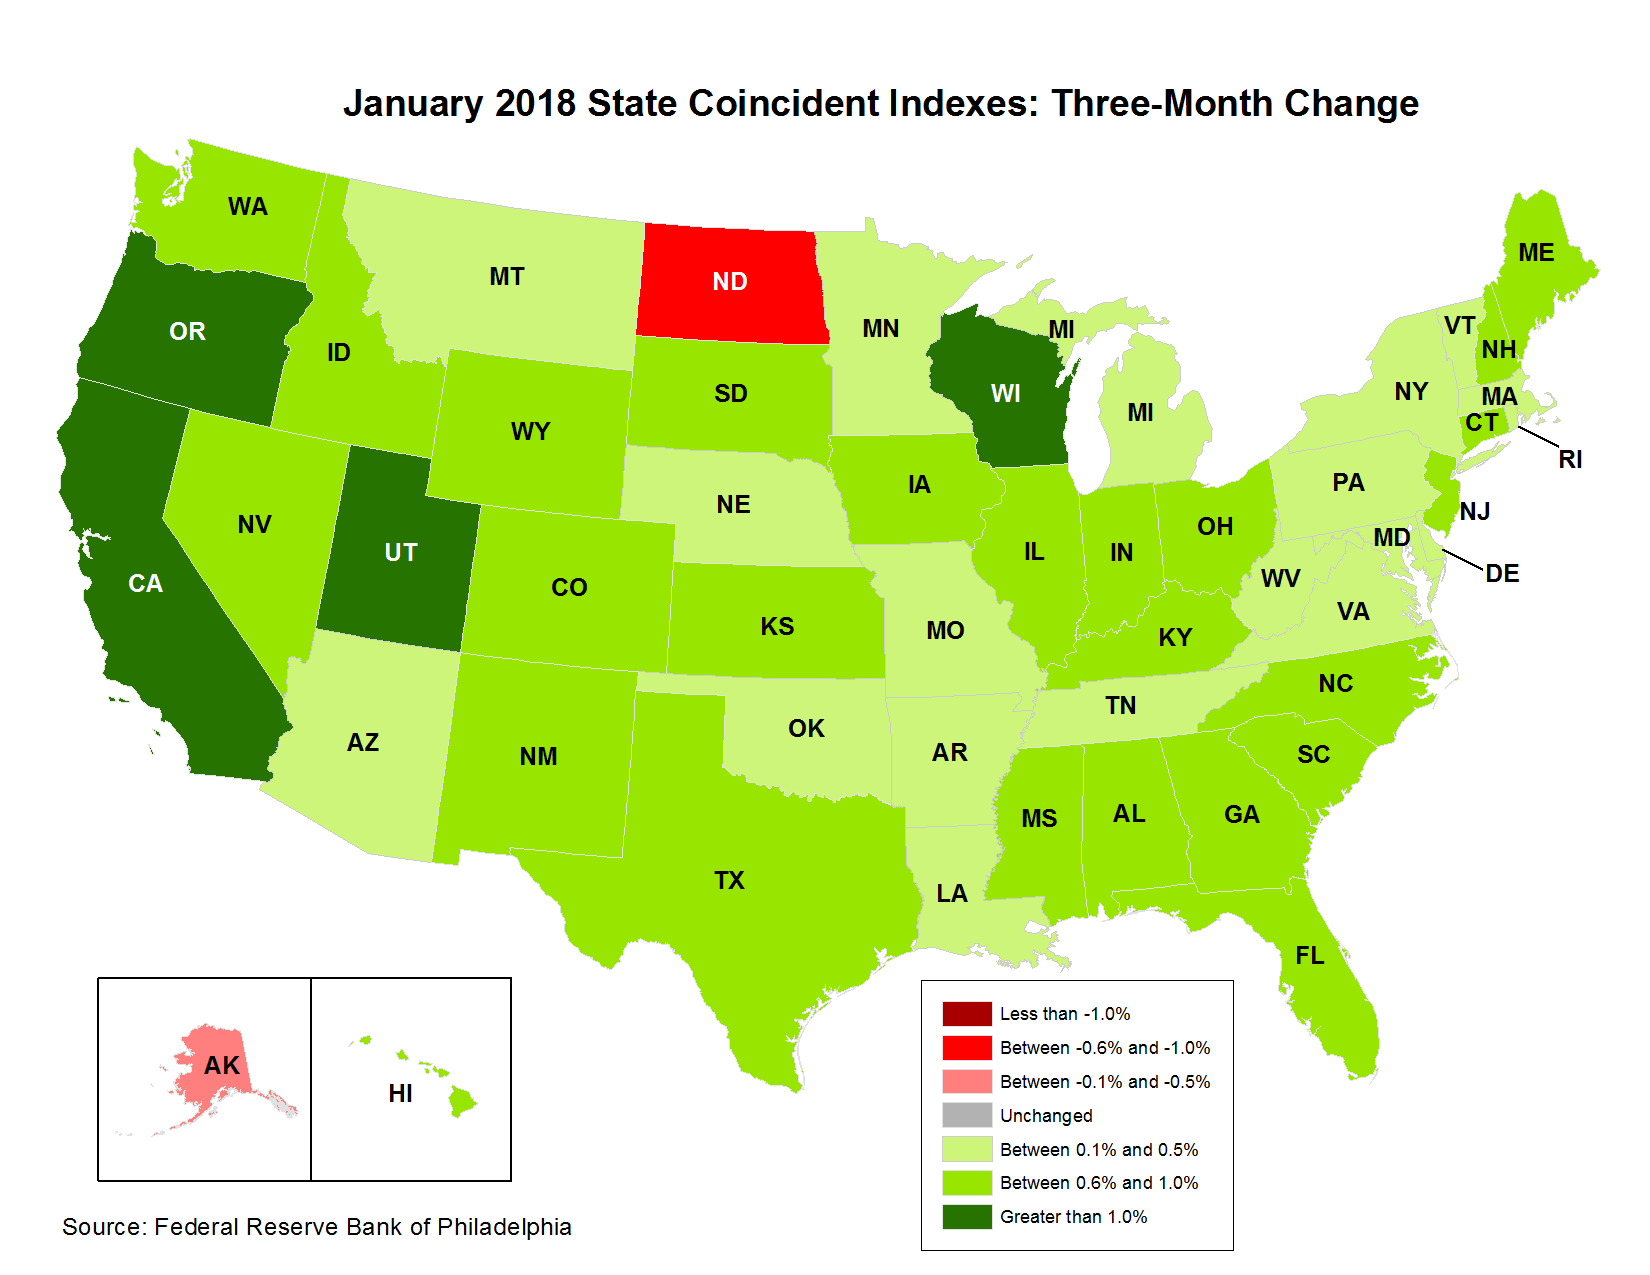 Map of the U.S. showing the State Coincident Indexes Three-Month Change in January 2018